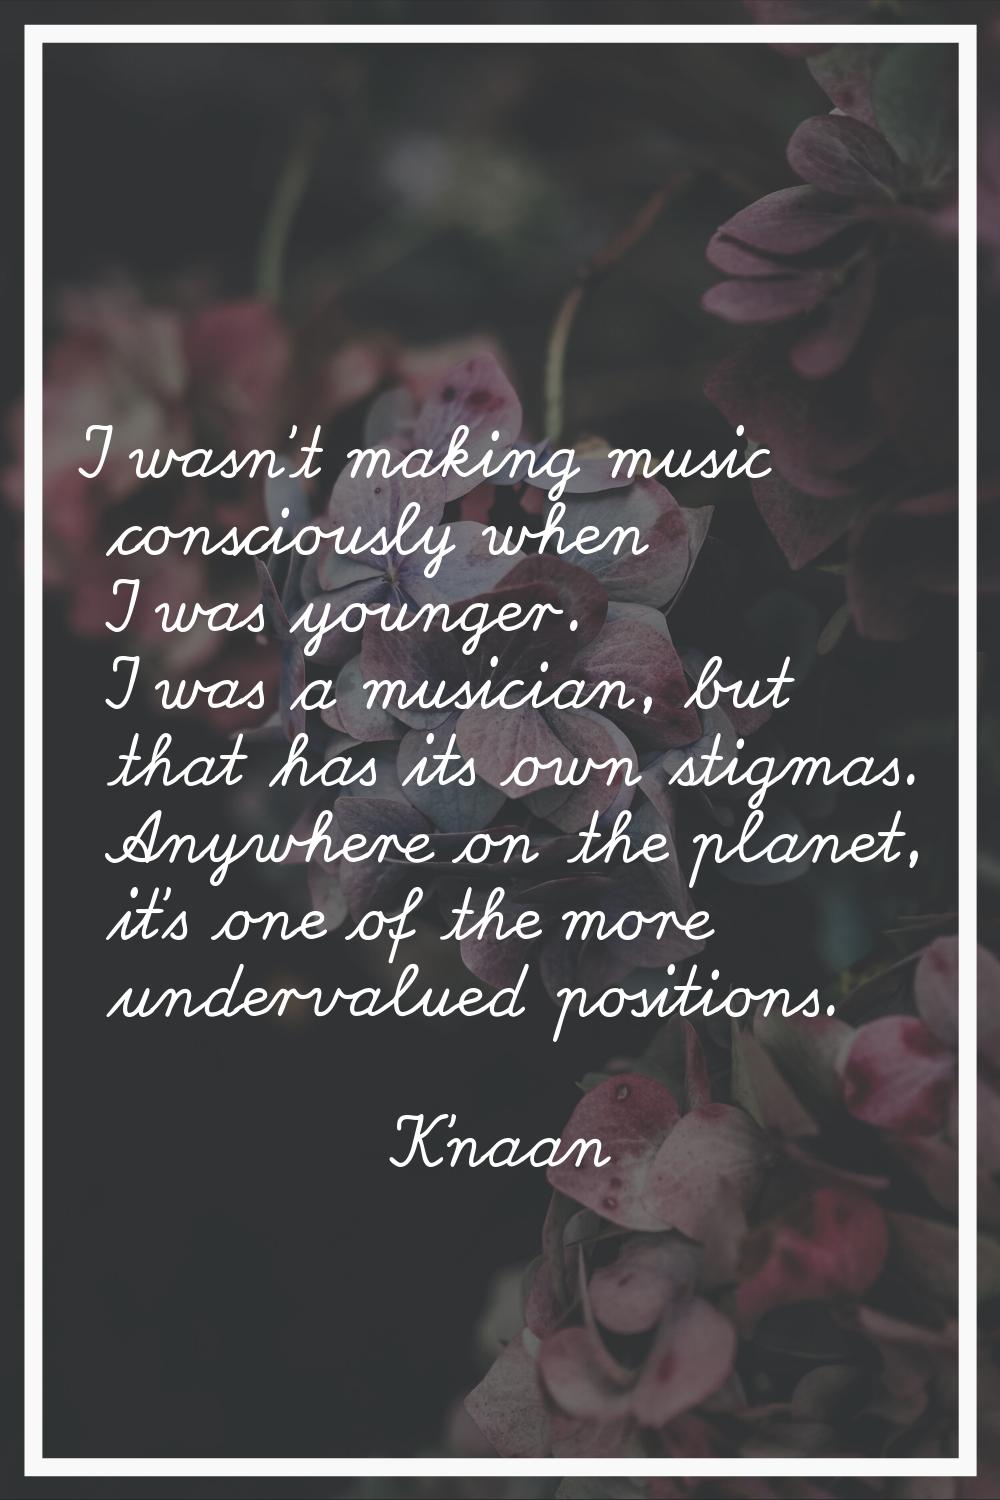 I wasn't making music consciously when I was younger. I was a musician, but that has its own stigma